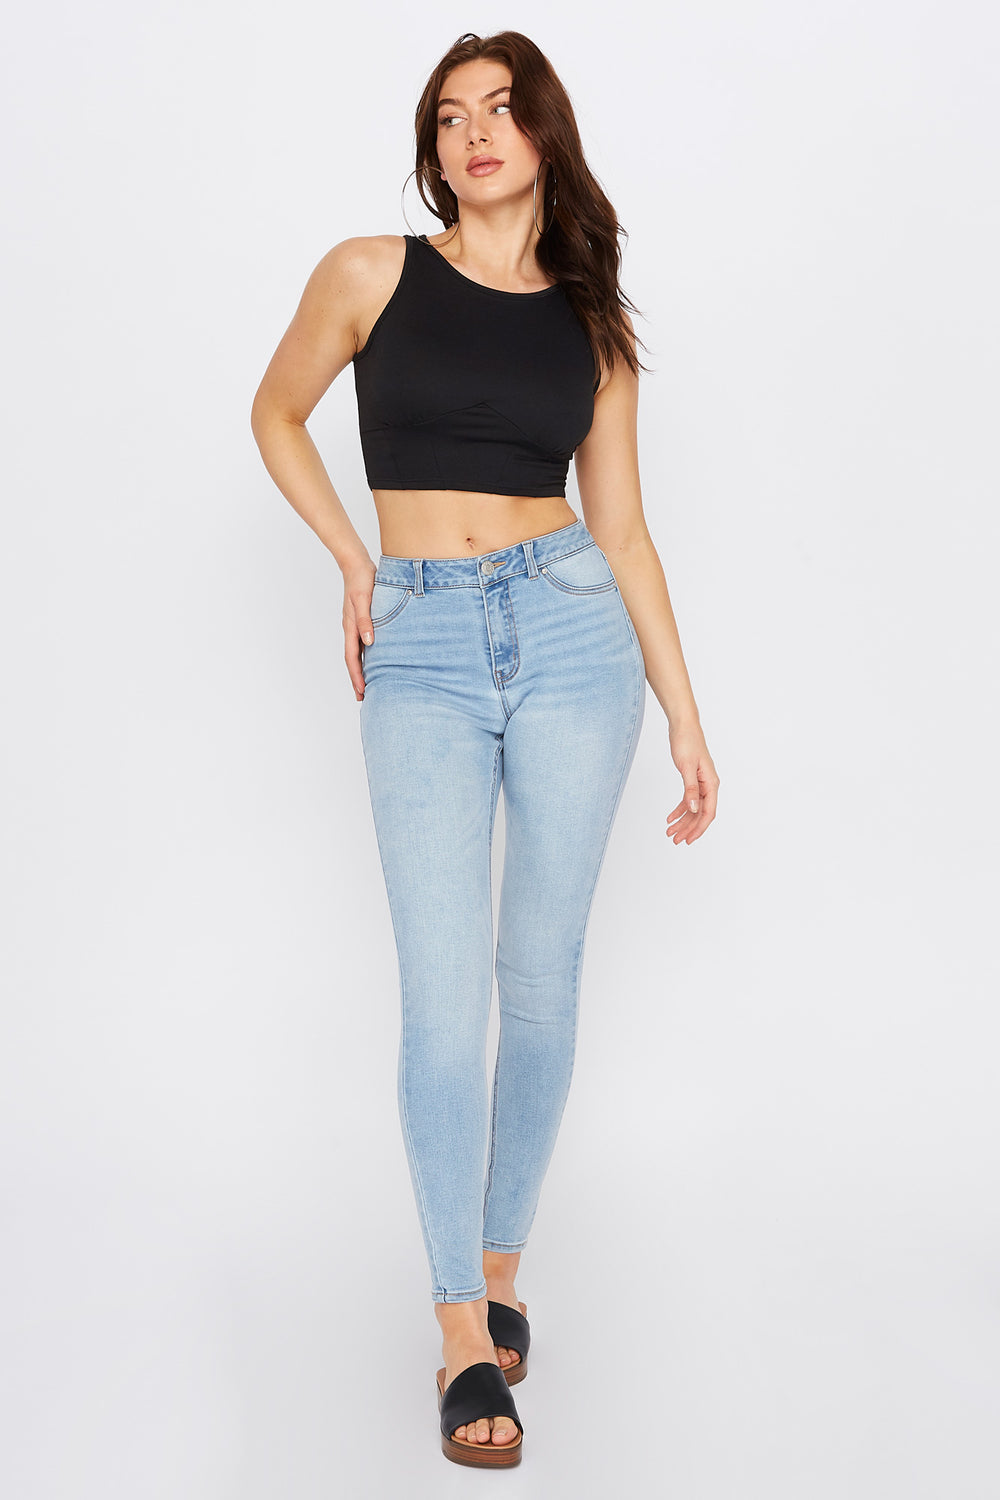 charlotte russe flare jeans